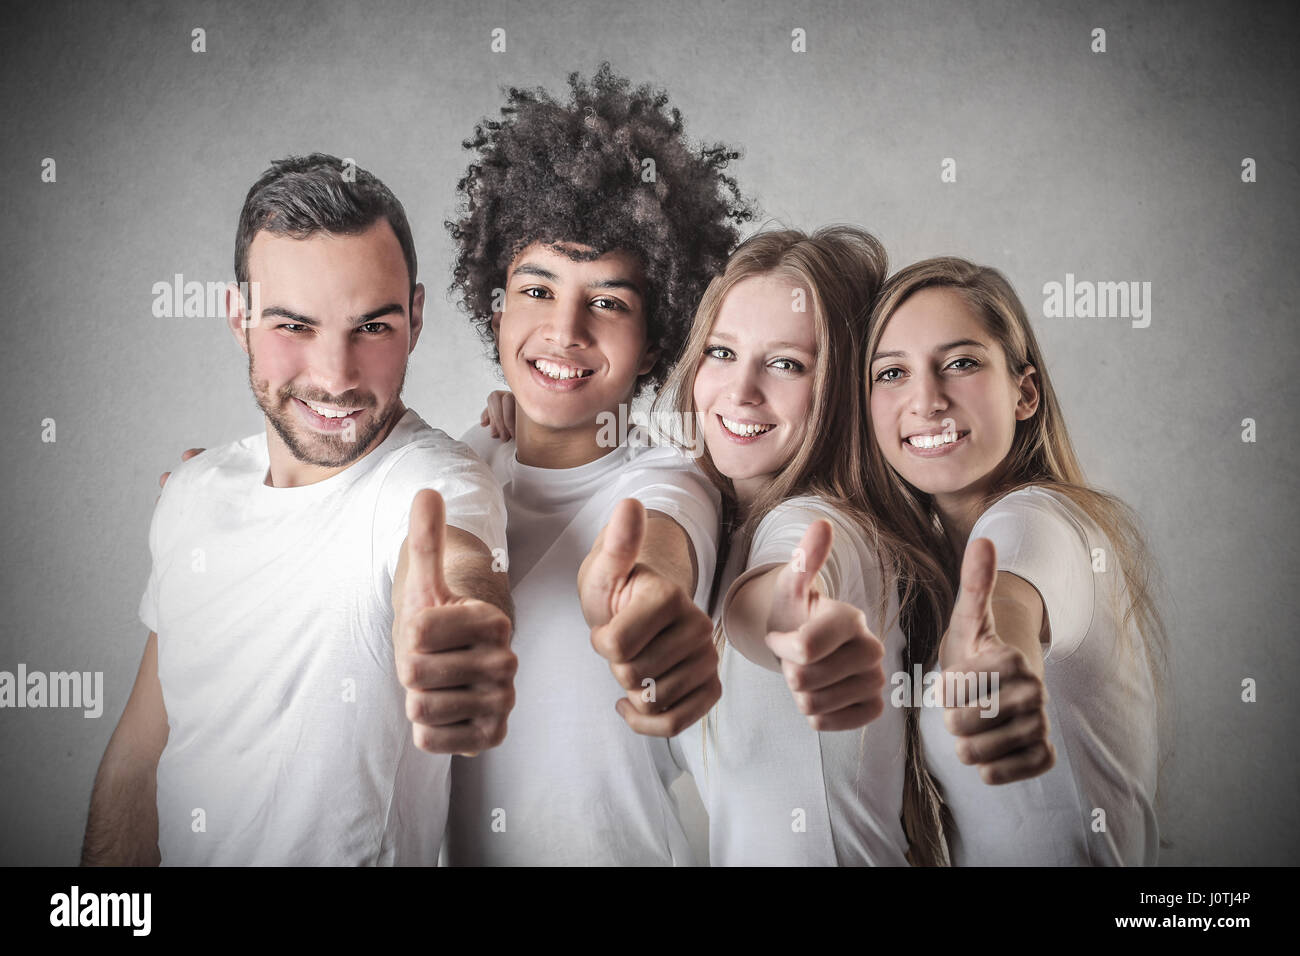 2 men and 2 women supporting you Stock Photo